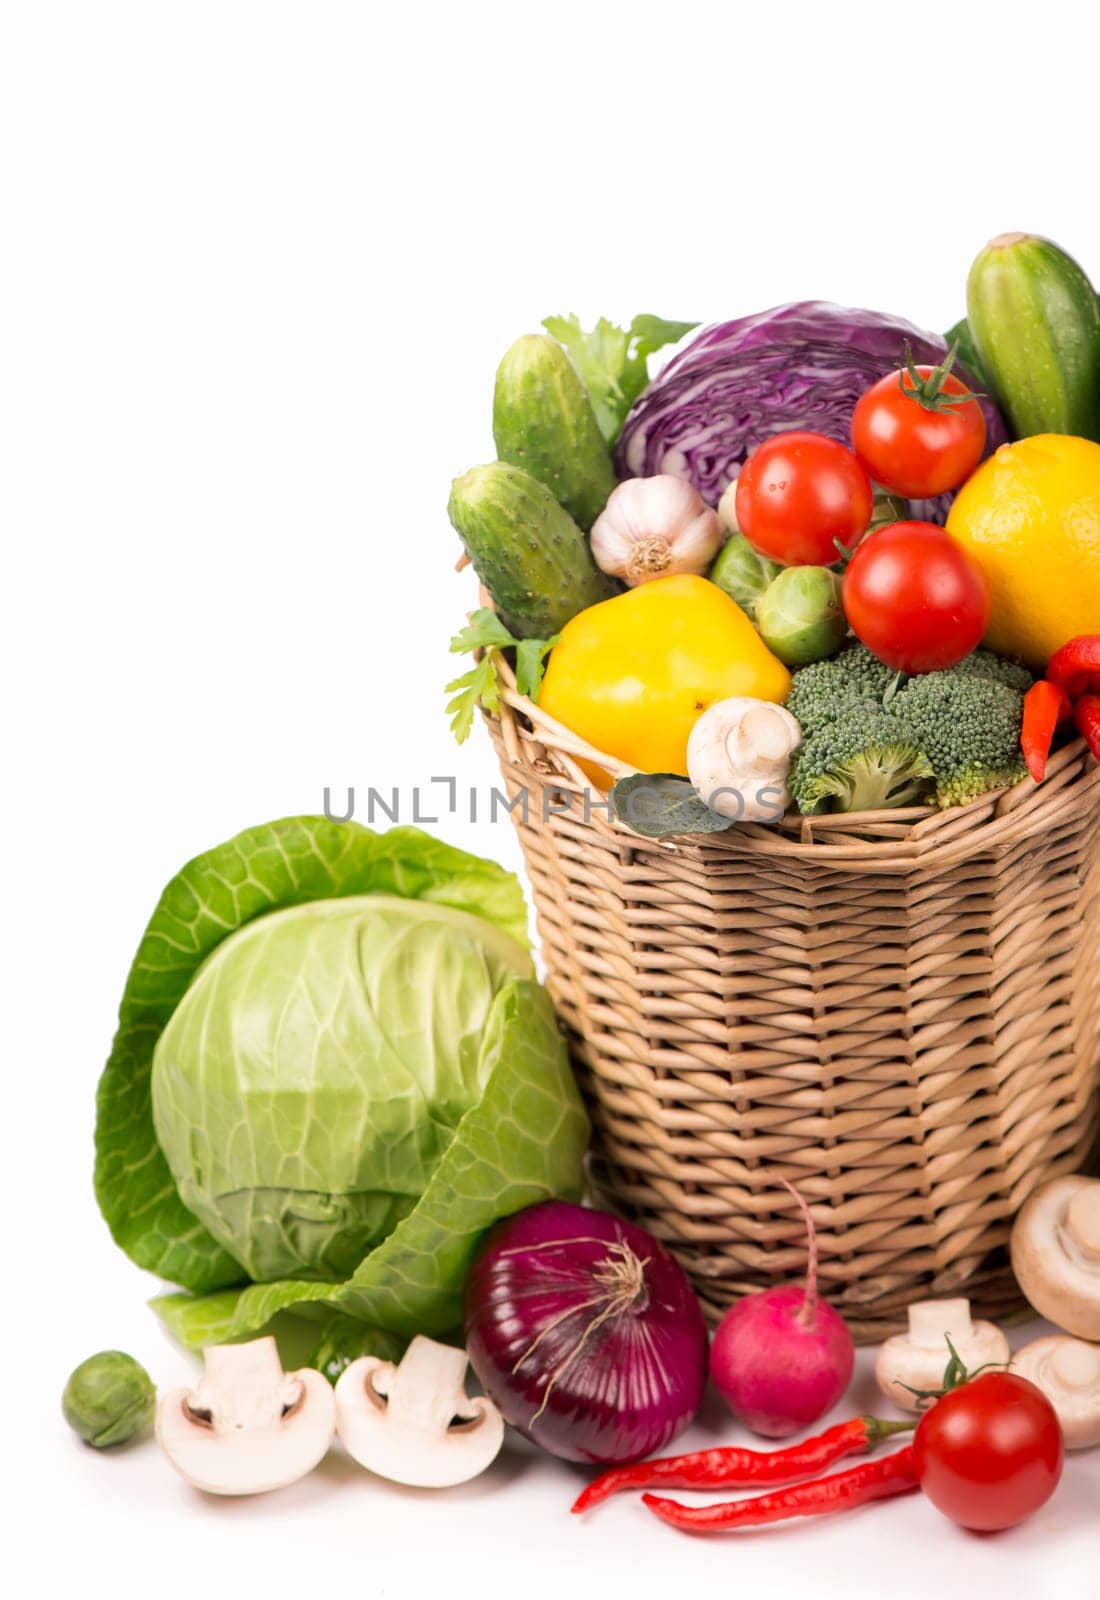 Top view of vegetables on wooden table and wicker basket, carrots velery tomatoes cabbage broccoli, copy space isolated on white background by aprilphoto